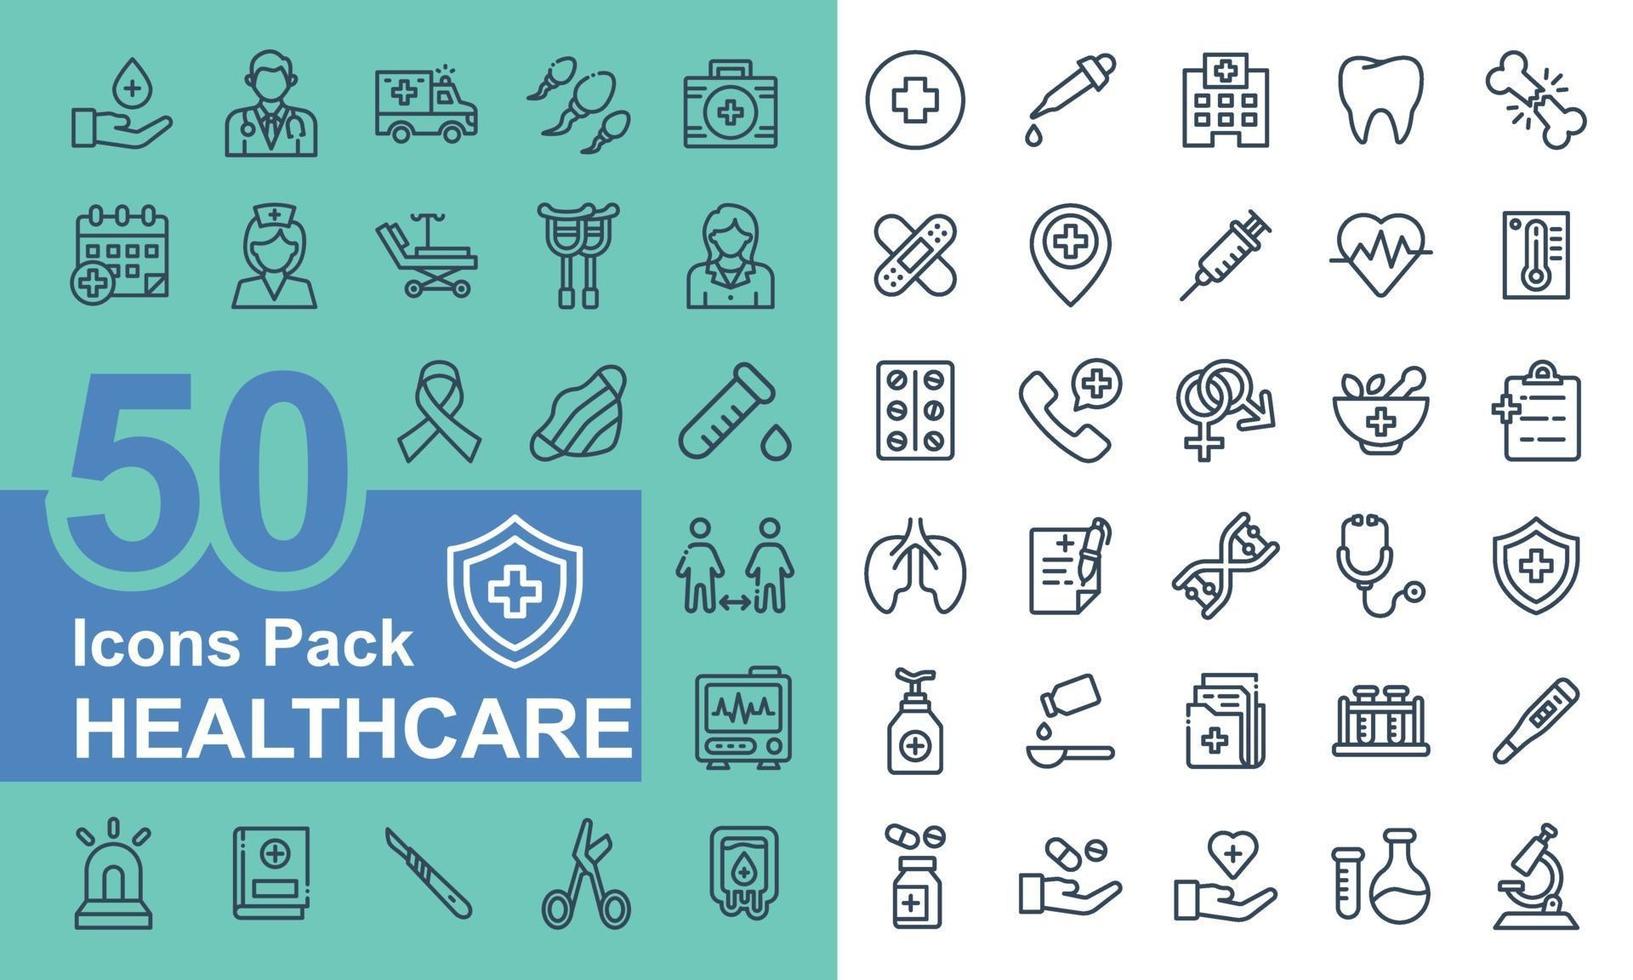 Medical and healthcare icon pack vector